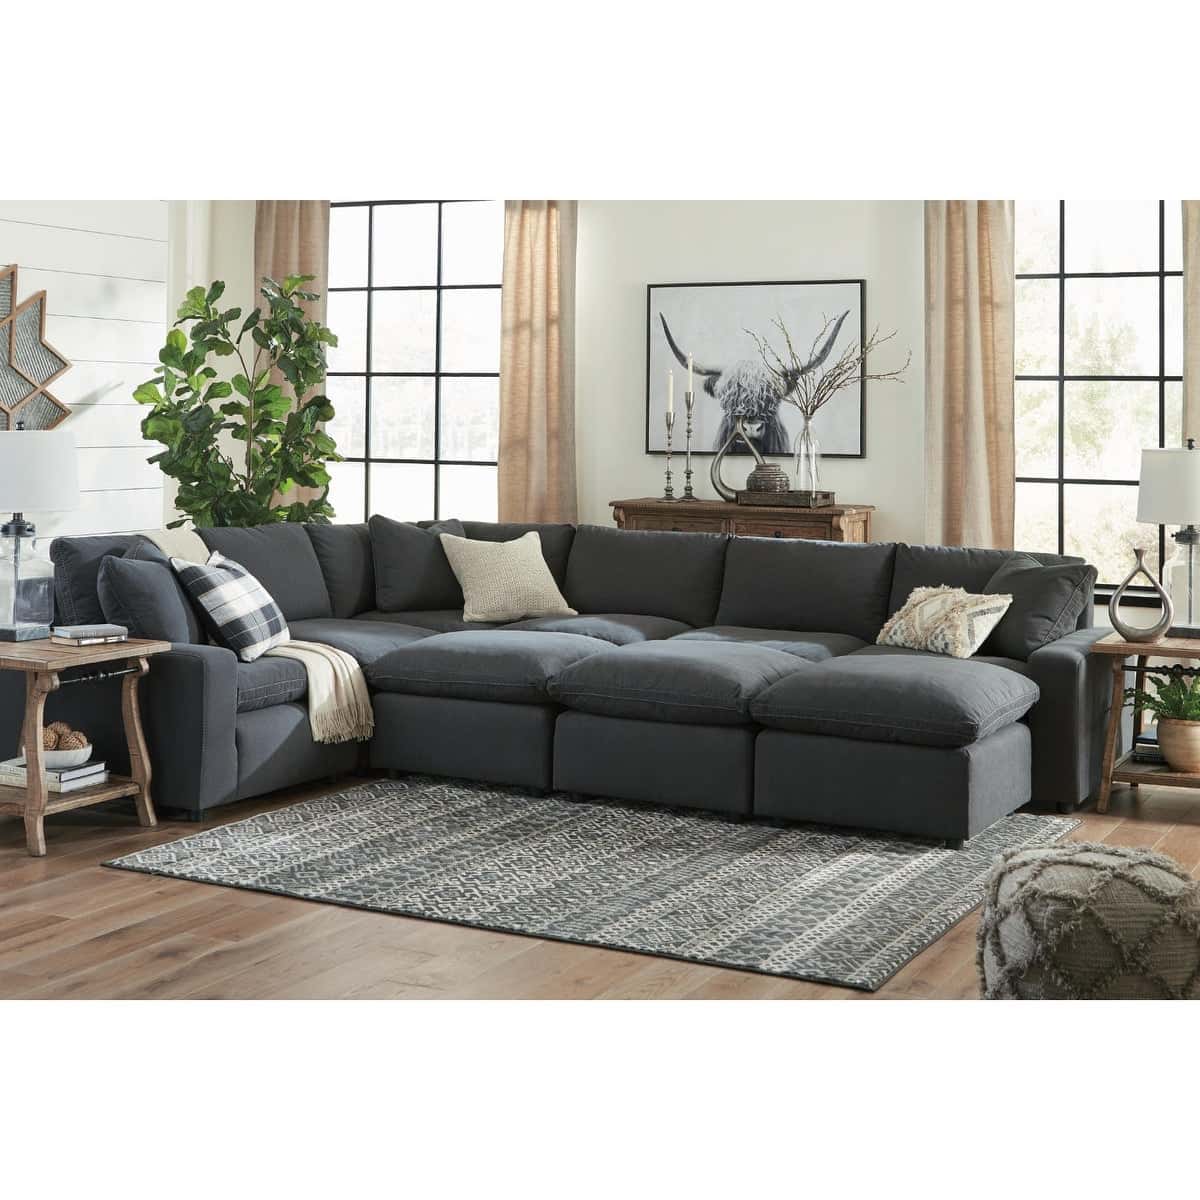 Build An Oversized Sectional